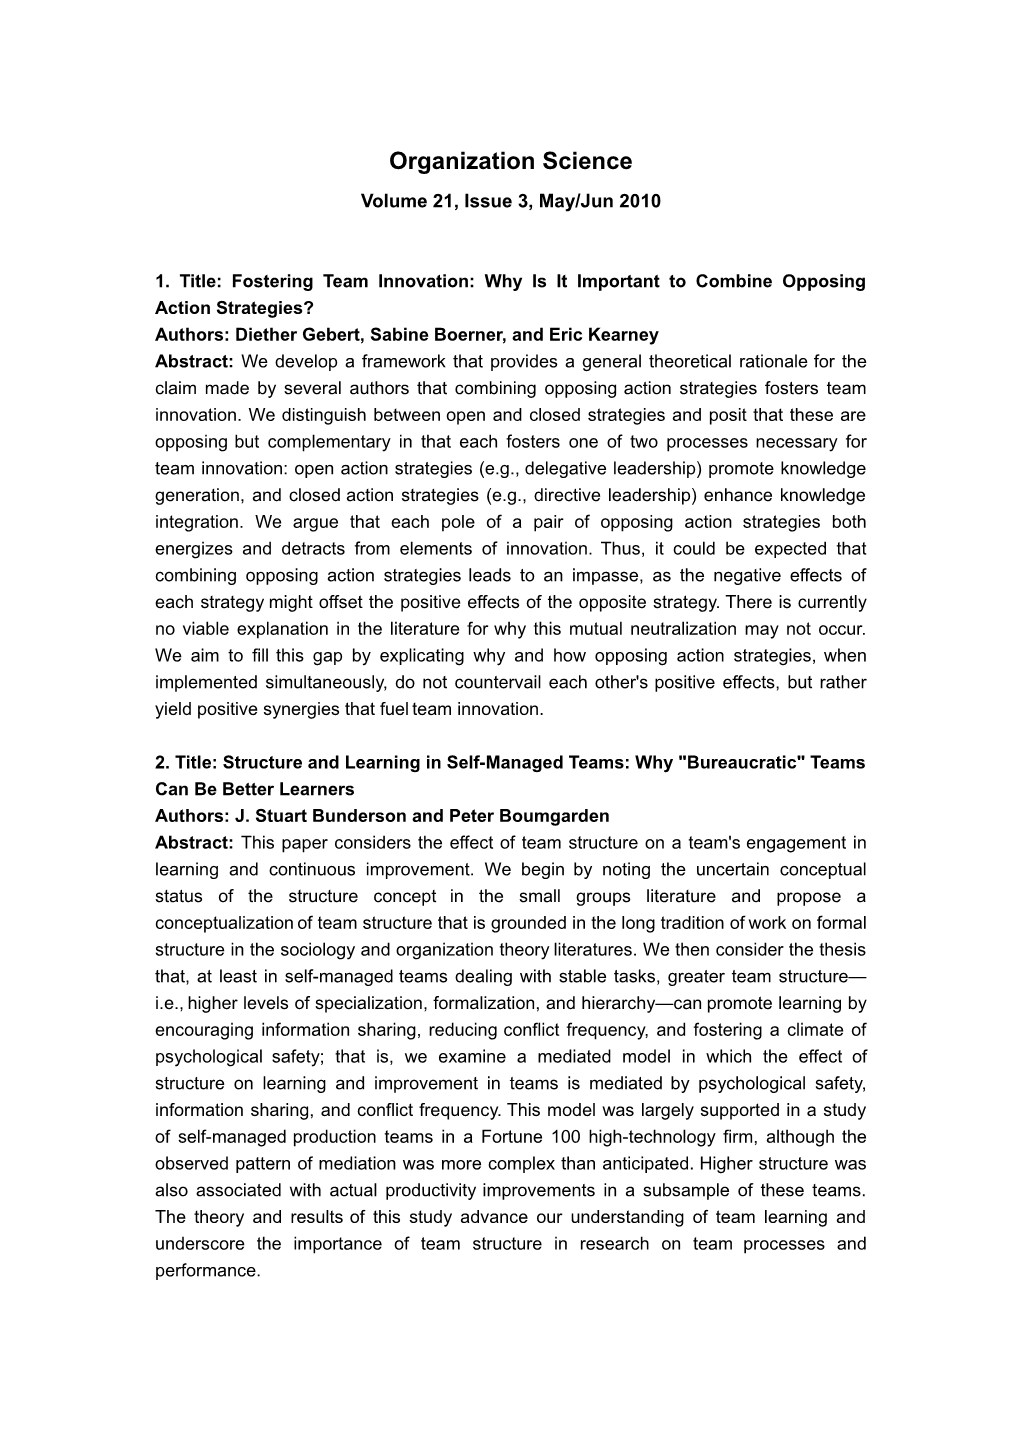 1. Title: Fostering Team Innovation: Why Is It Important to Combine Opposing Action Strategies?